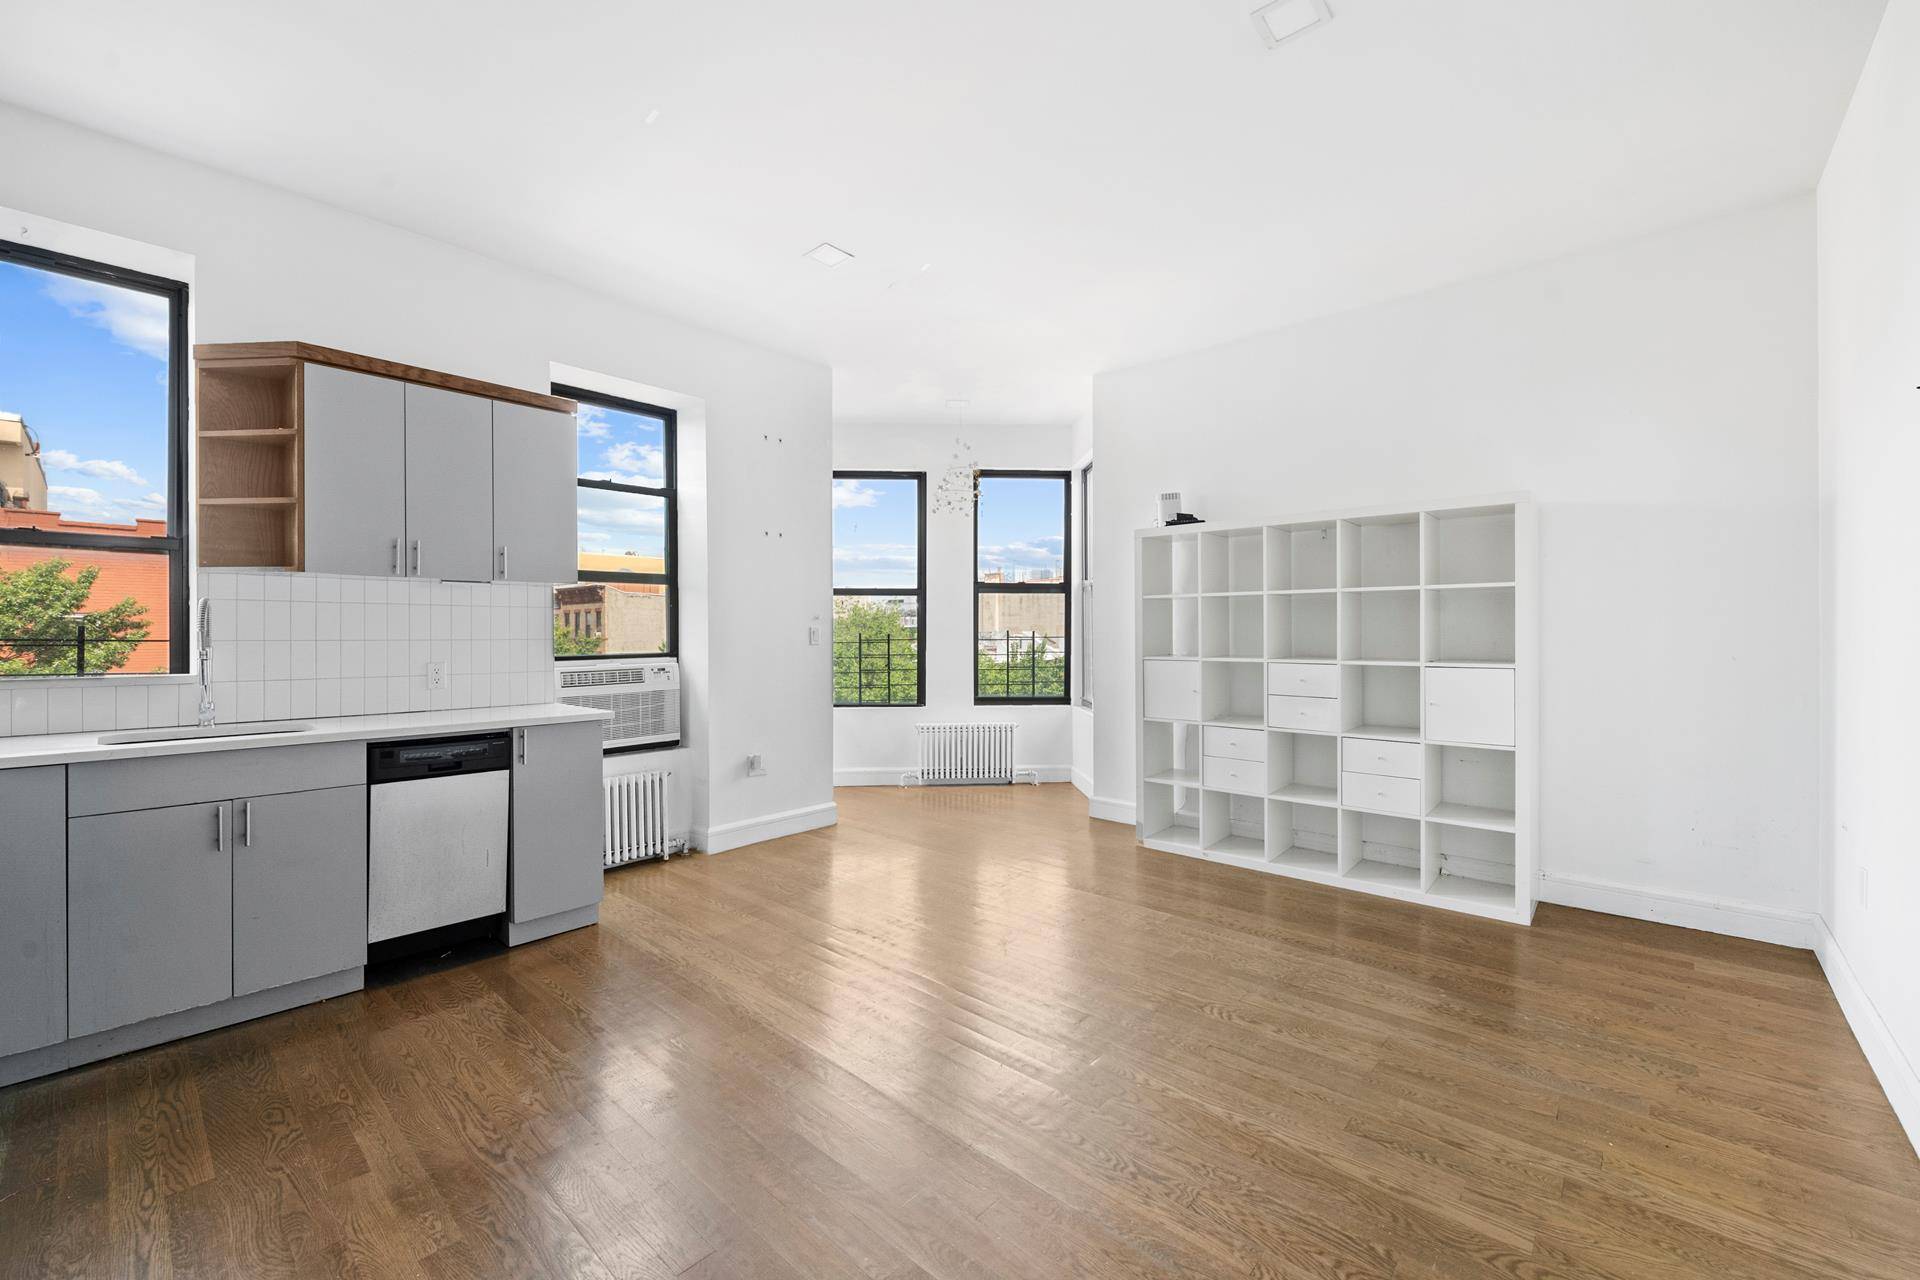 Brand new fully renovated corner three bedroom, two bathroom home in coveted Park Slope.